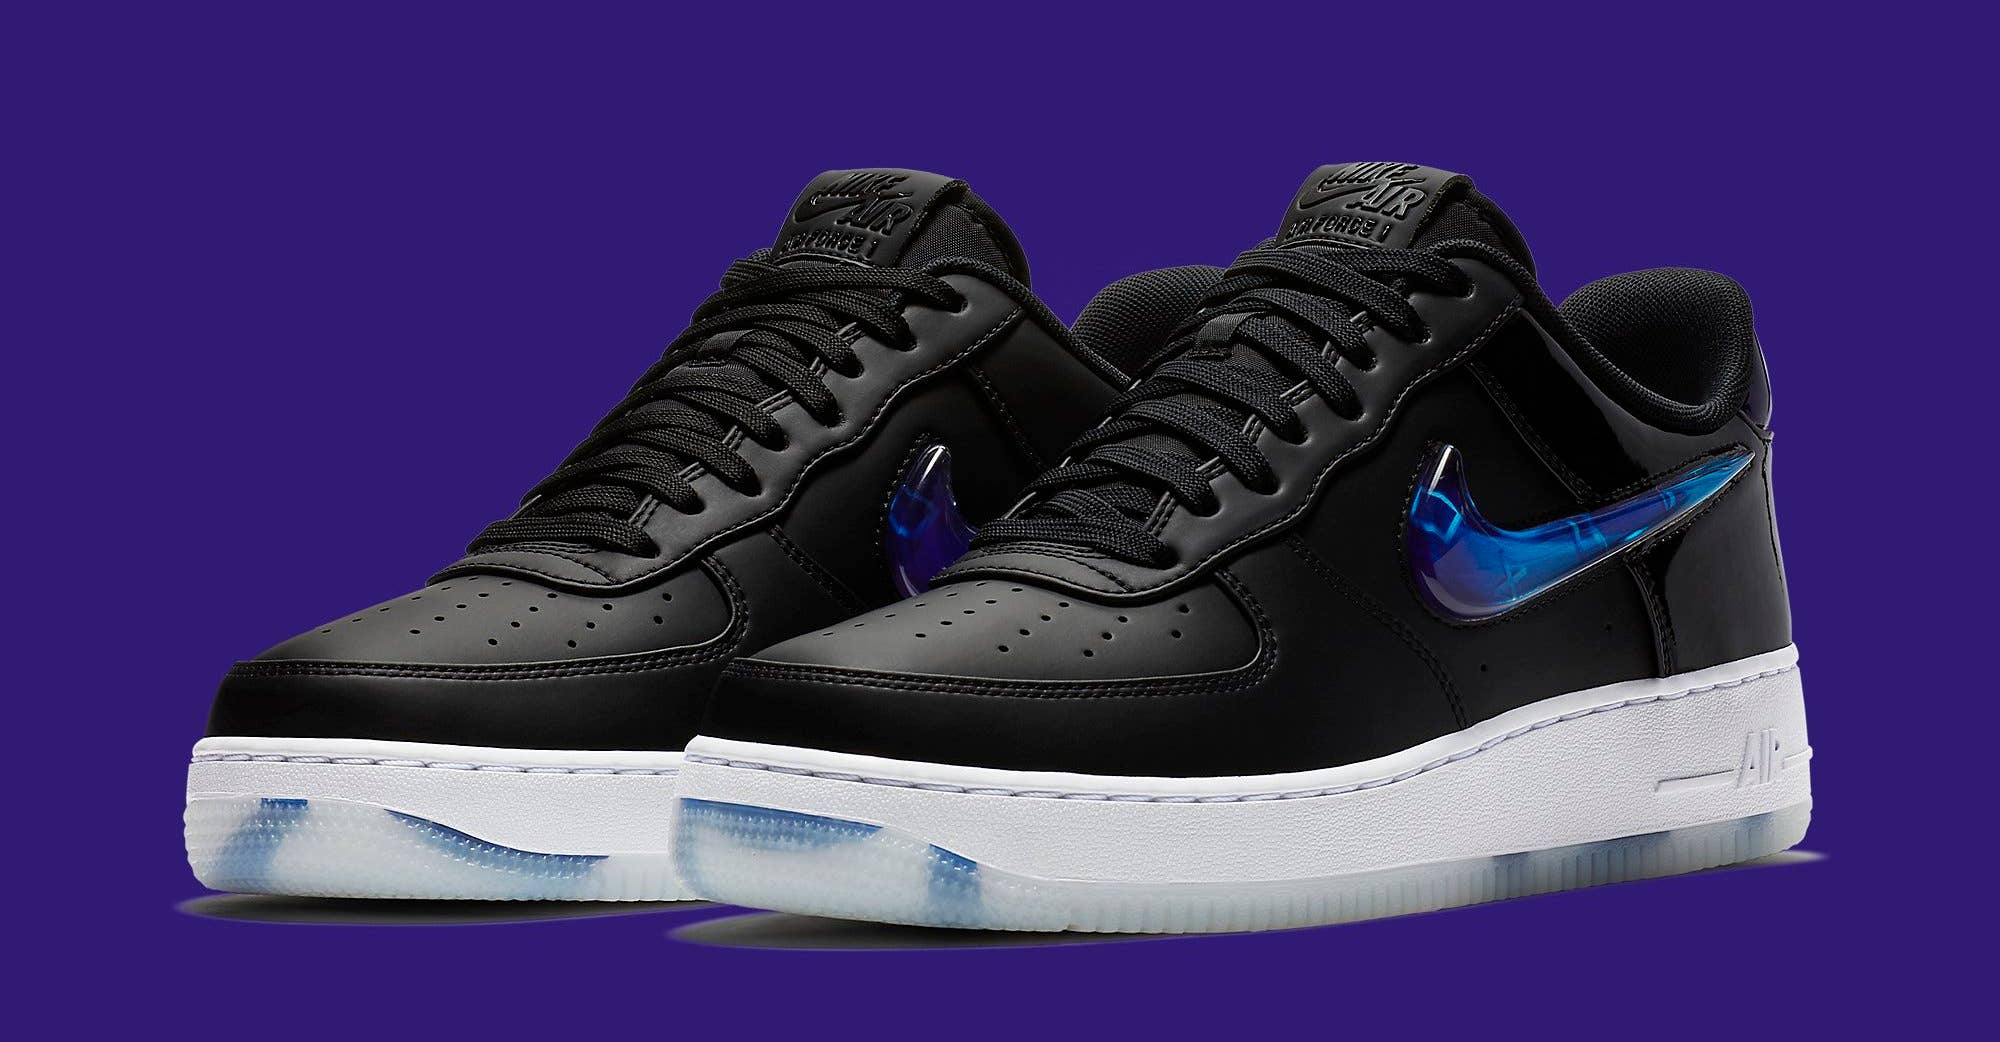 Playstation x Nike Air 1s Release Today |